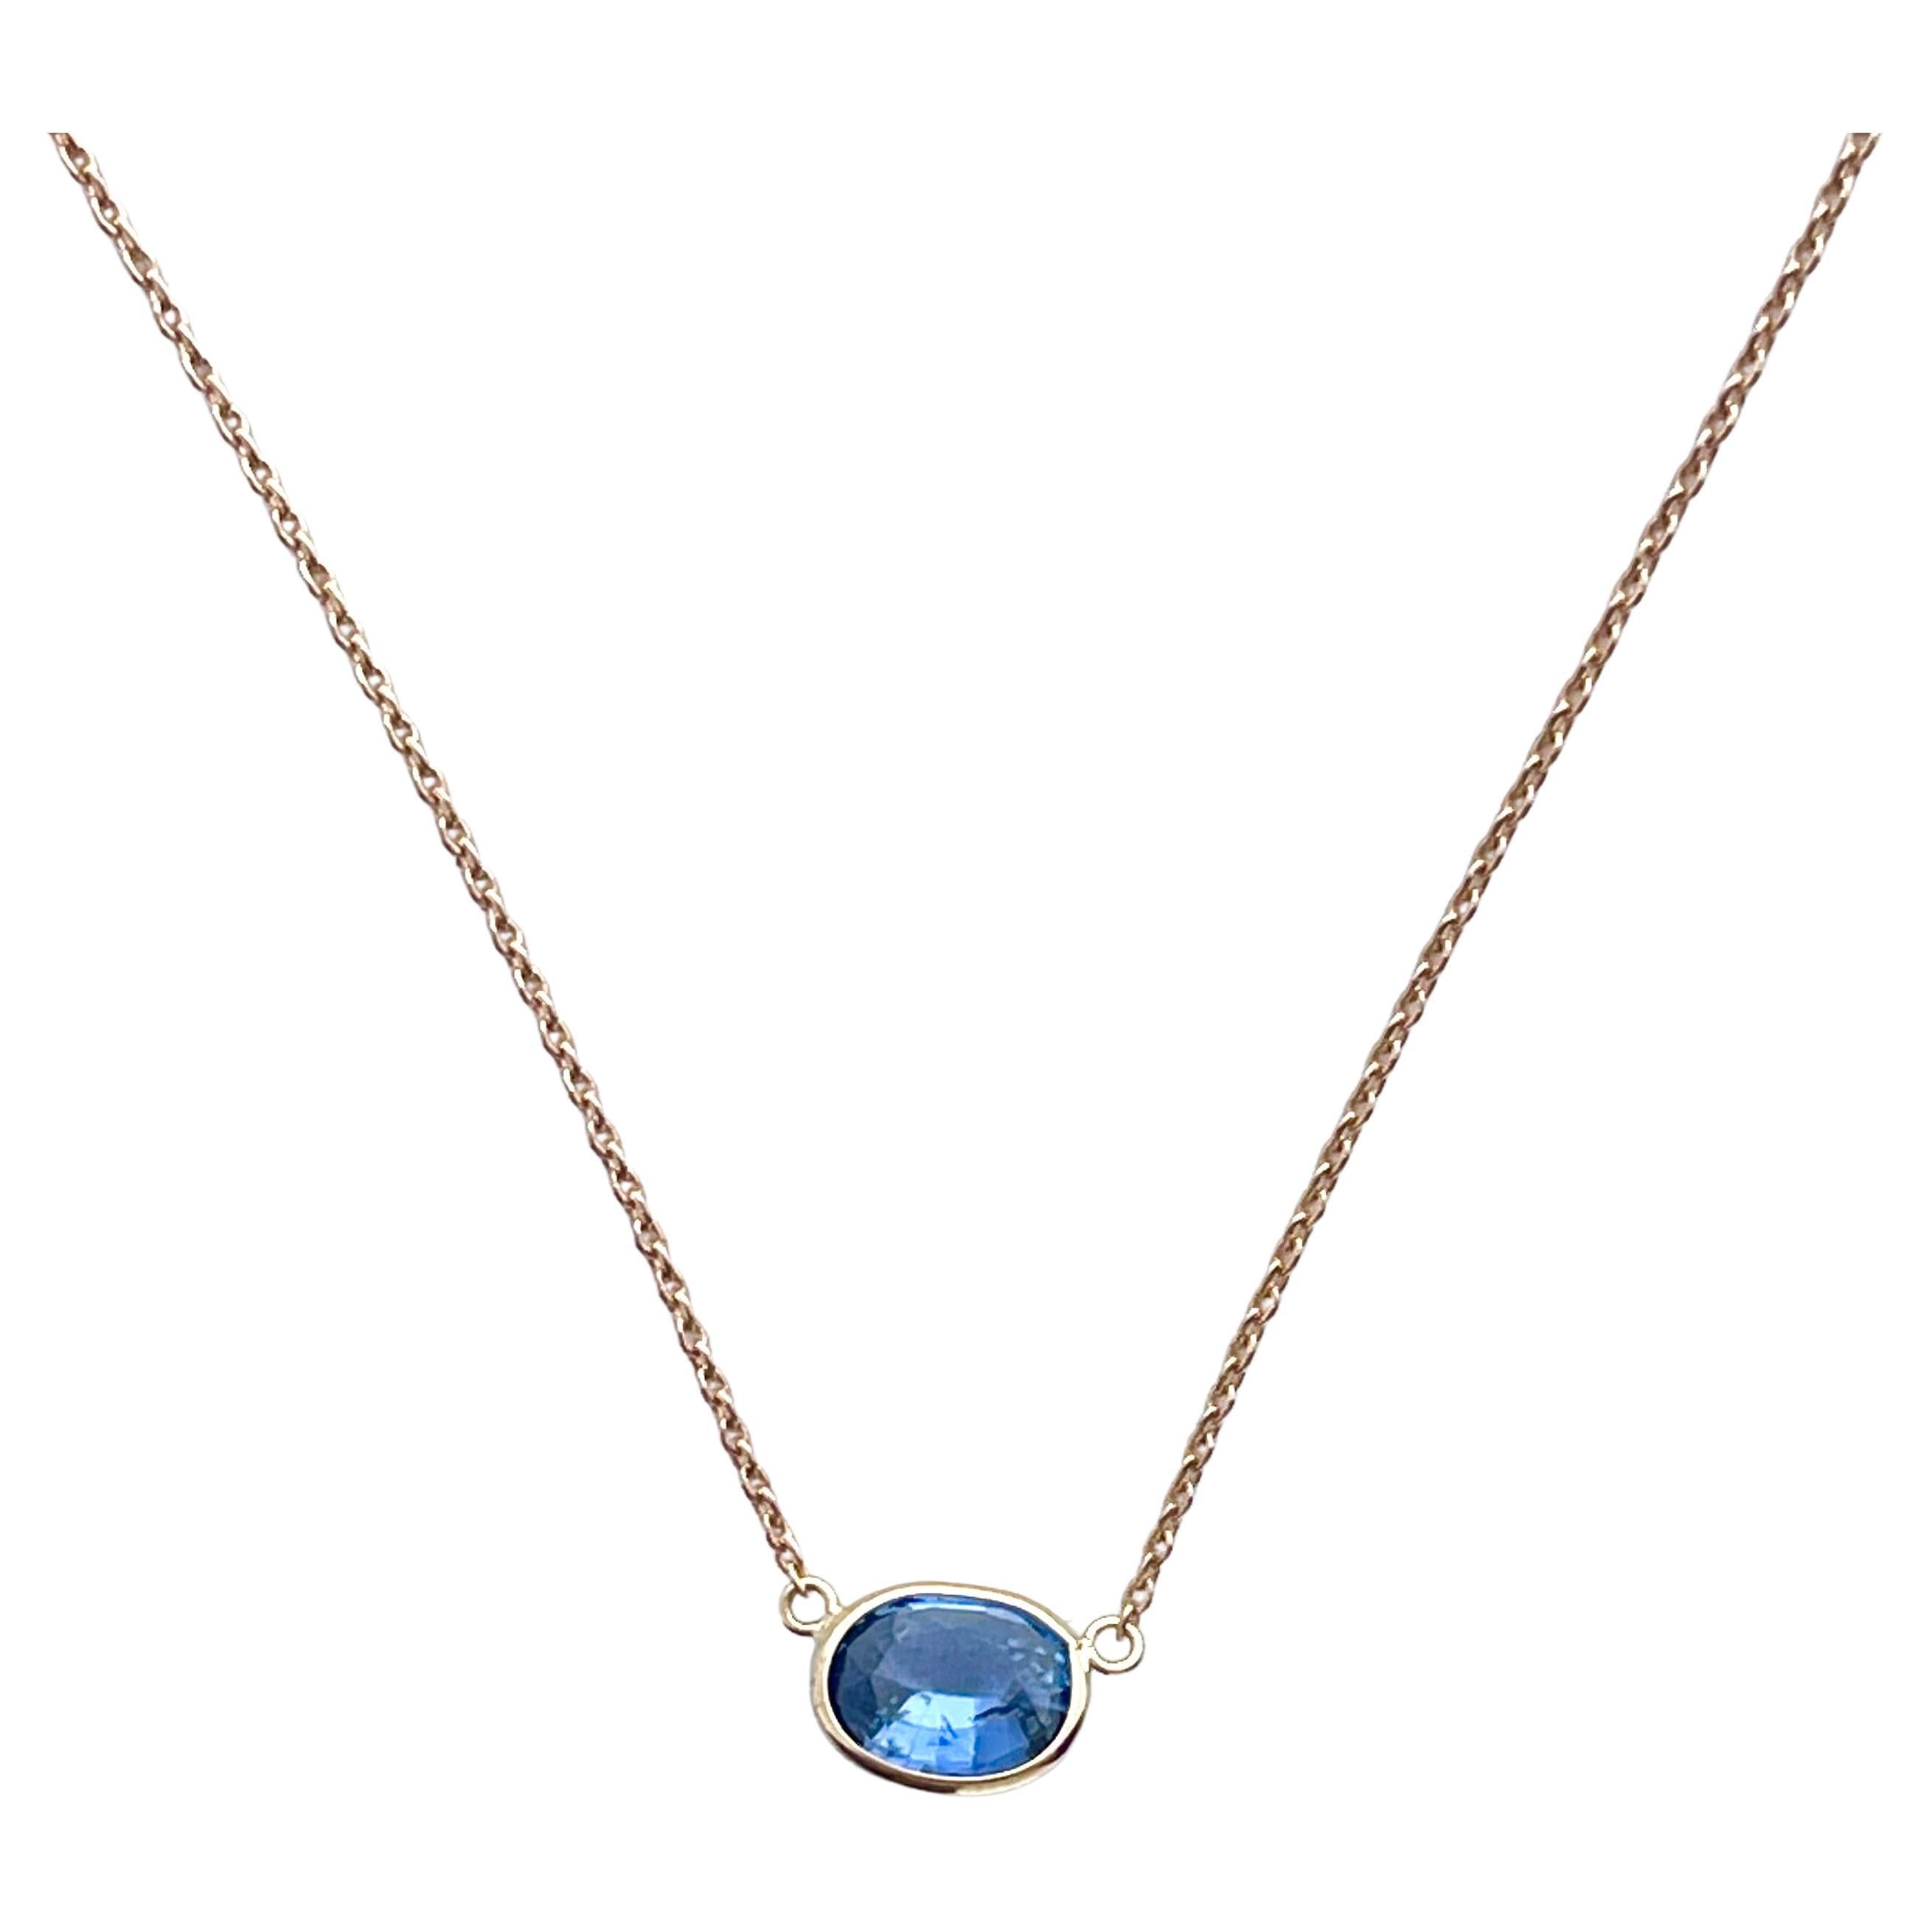 1.42 Carat Sapphire Blue Oval & Fashion Necklaces In 14K Rose Gold